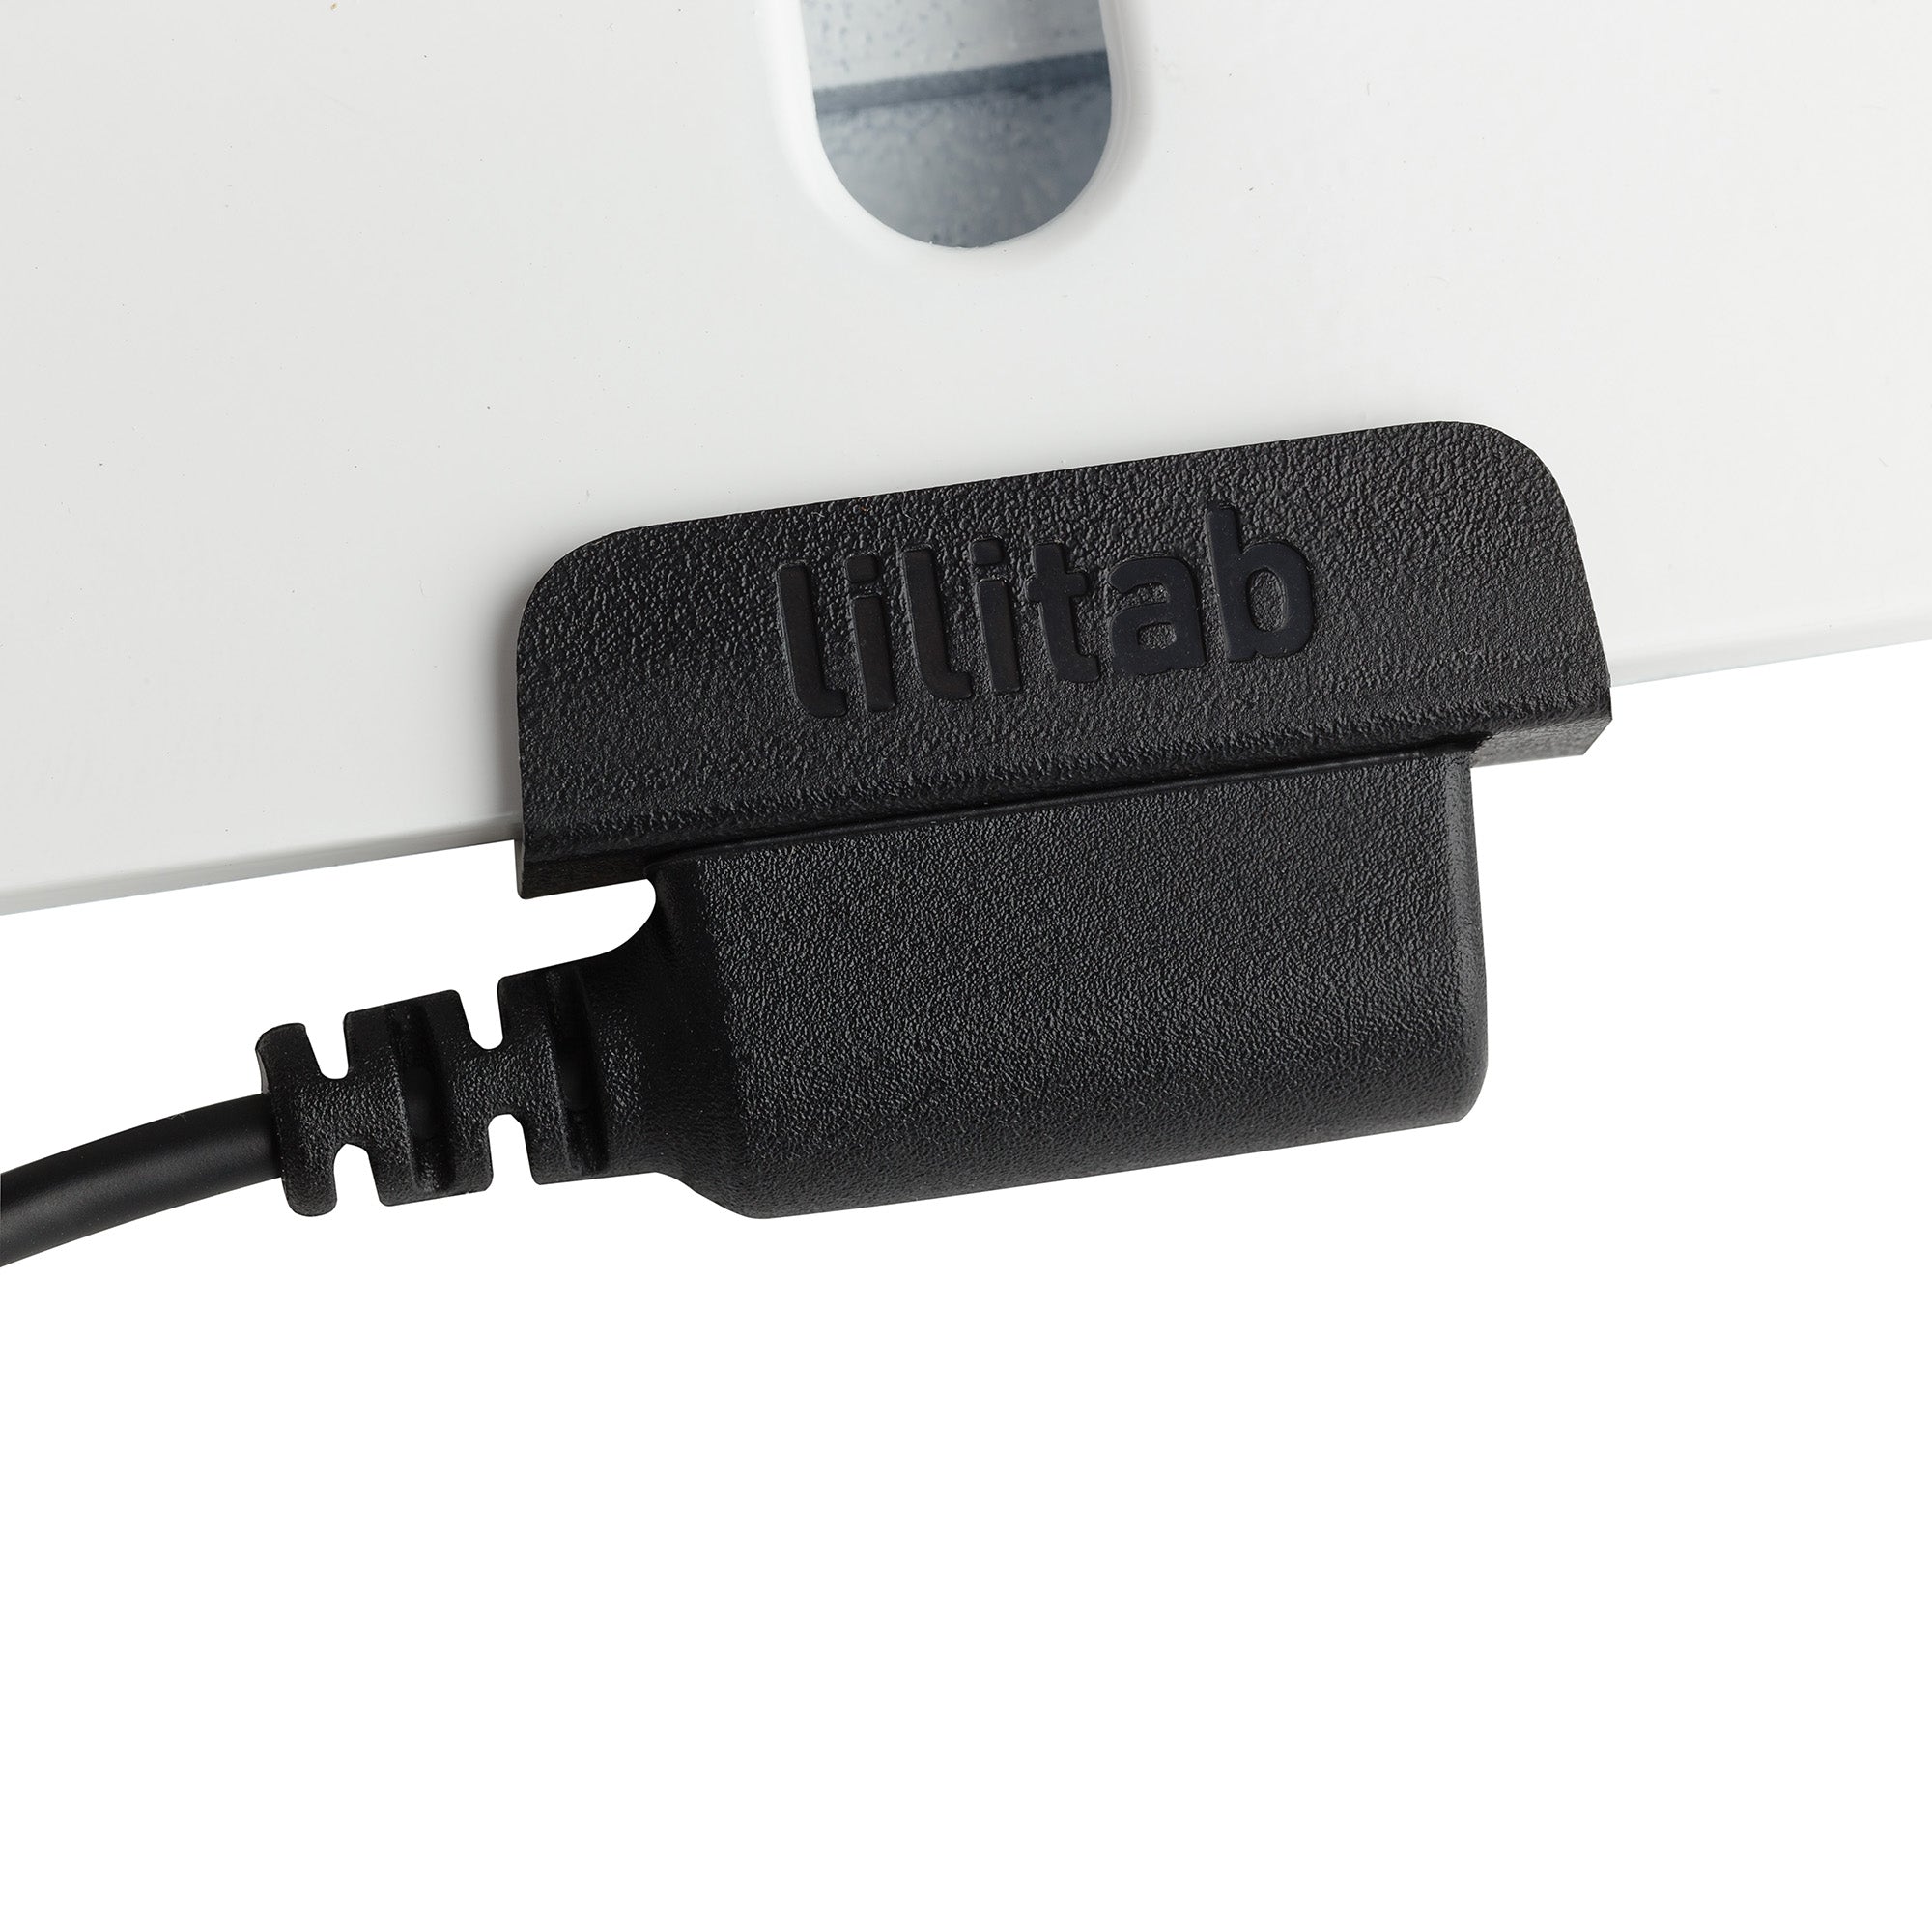 Close up of Lilitab edge-charging cable for handheld use.